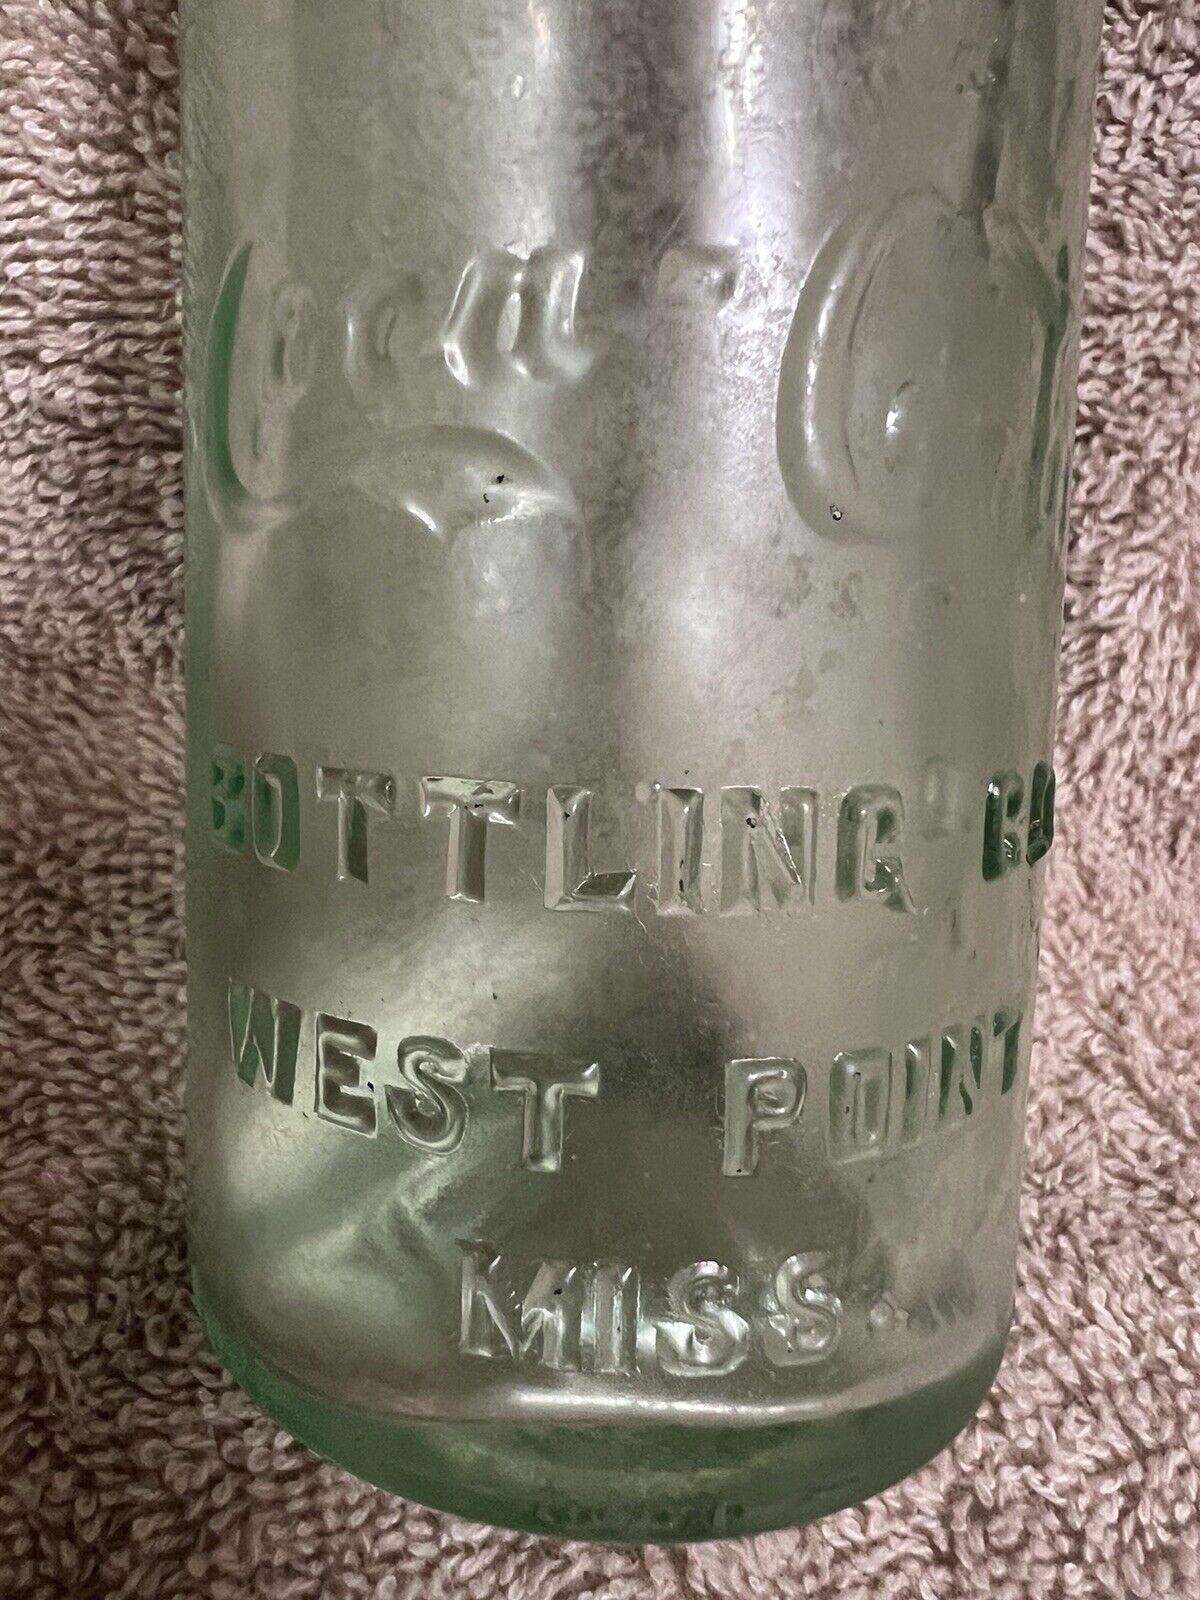 NEAR MINT Coca-Cola Mid Script Bottle from West Point, Mississippi Miss MS